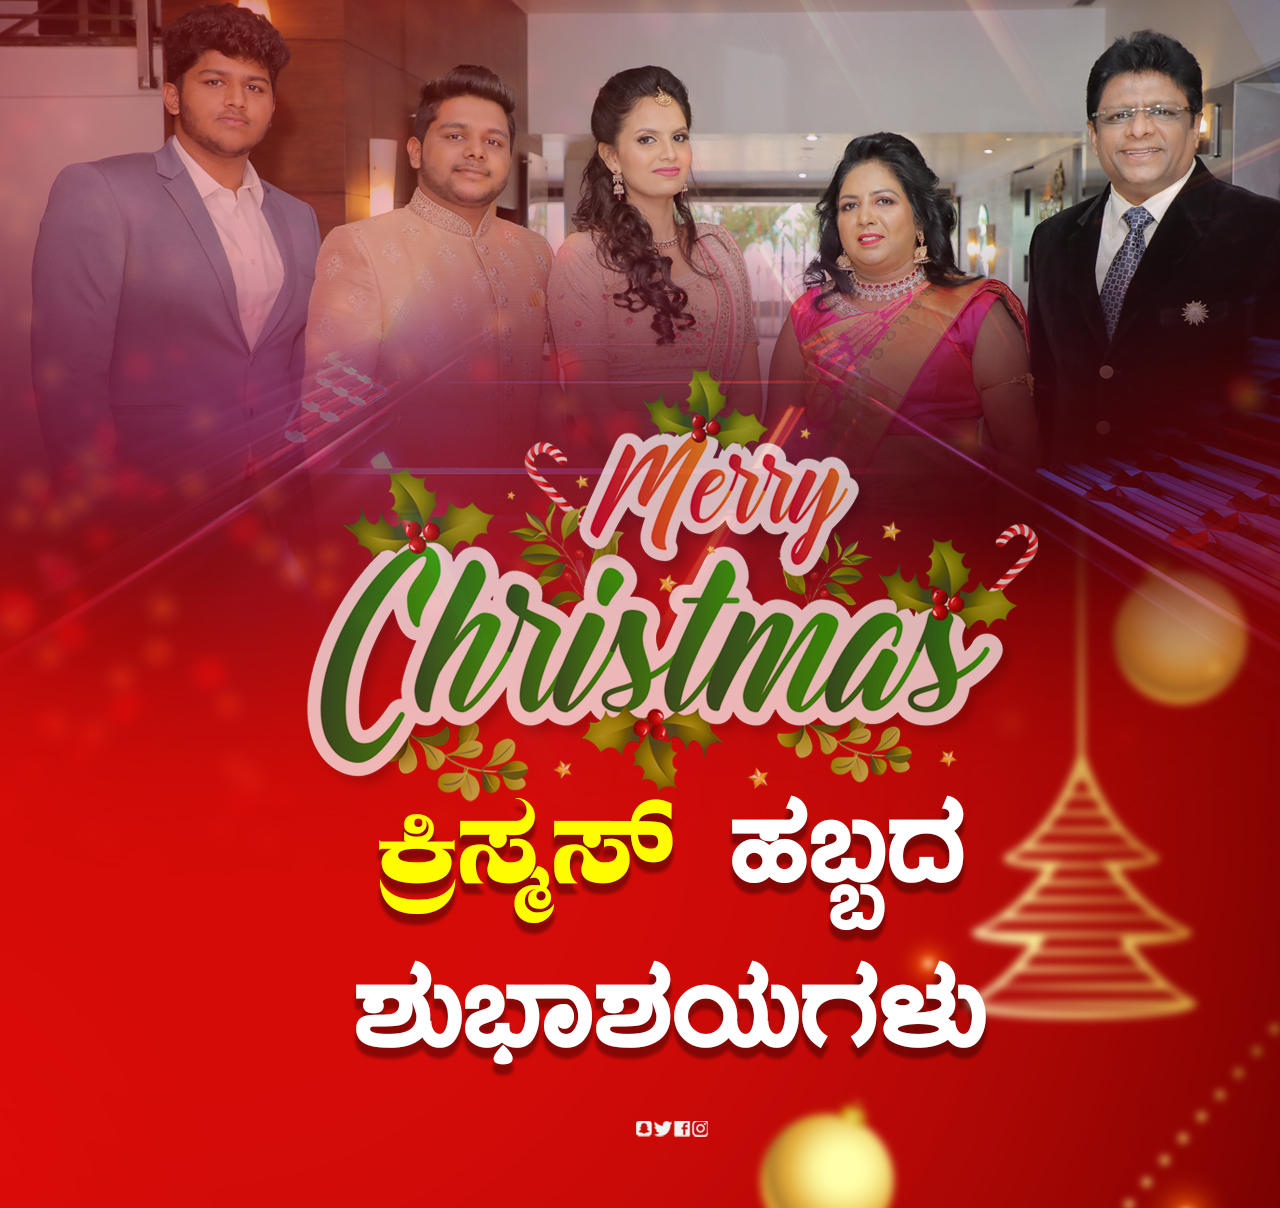 Grace Ministry, Mangalore wishes Christian world a blessed Merry Christmas 2022. May this festive season sparkle and shine, may all of your wishes and dreams come true, and may you feel this happiness all year round. Merry Christmas!